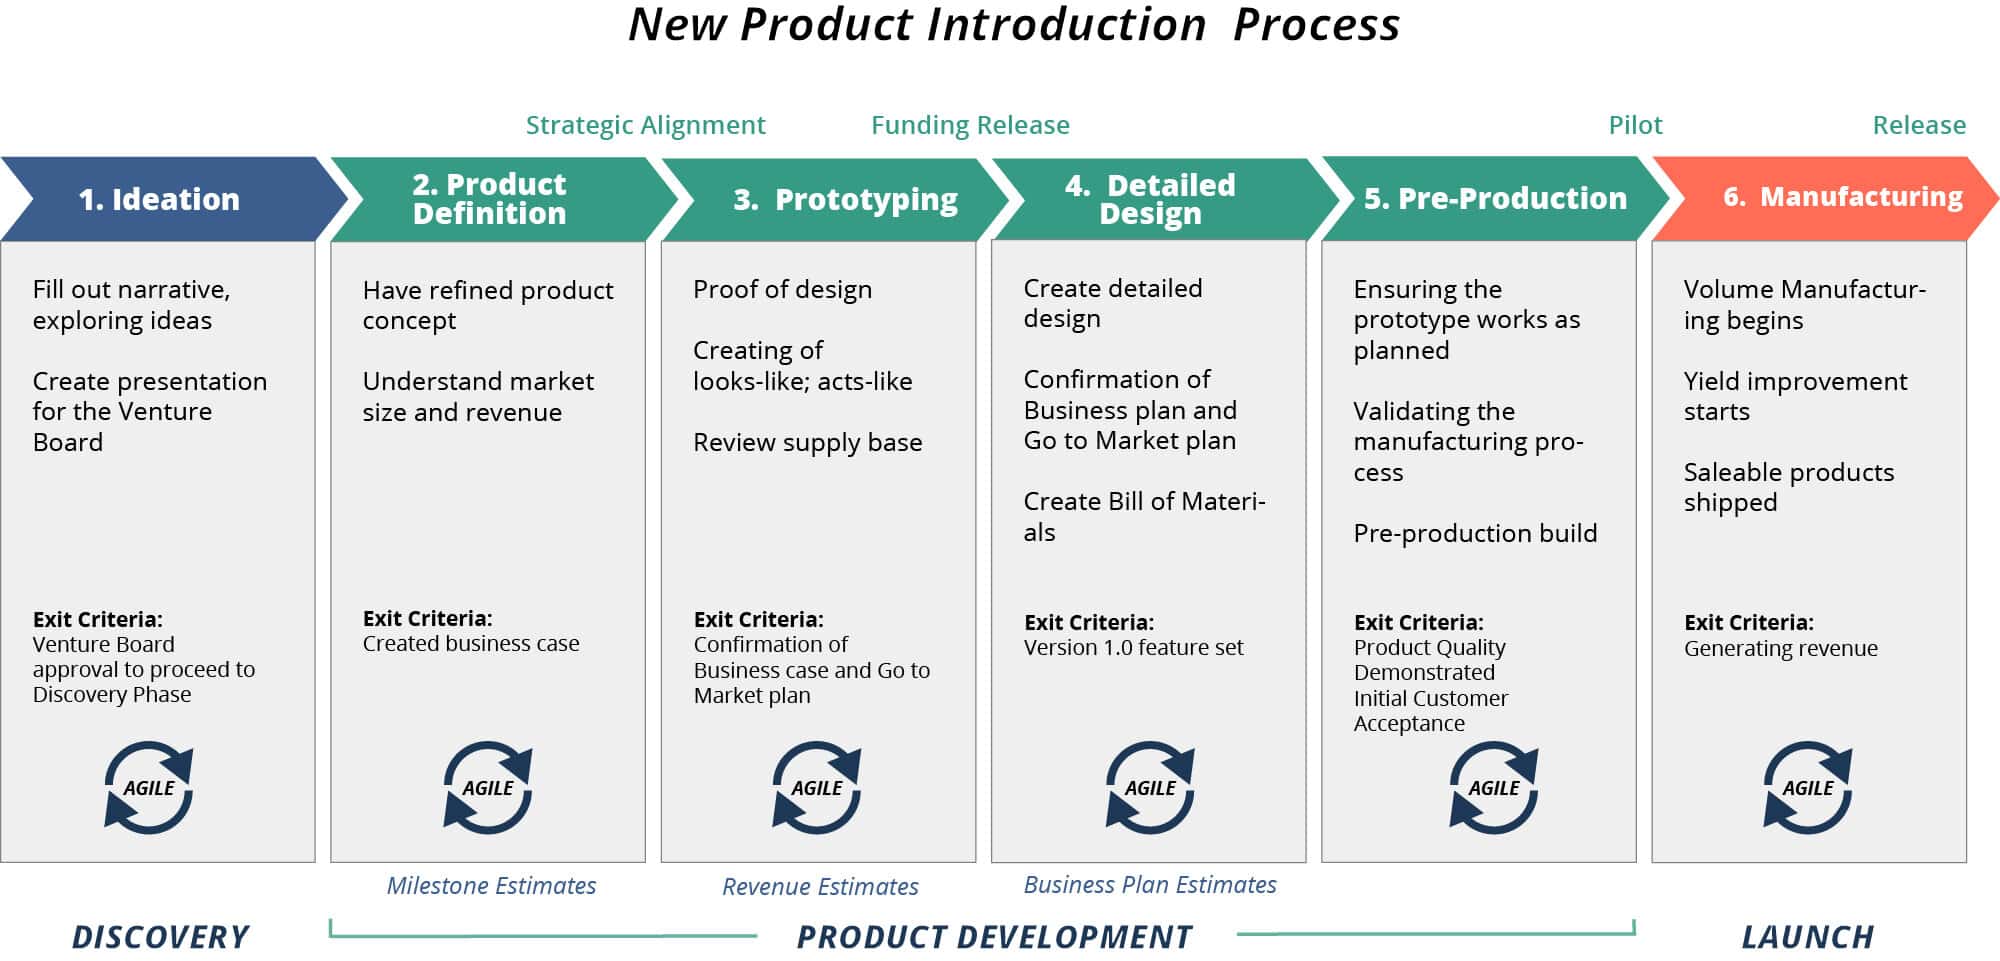 NPI New Product Introduction | Definitive Guide TCGen